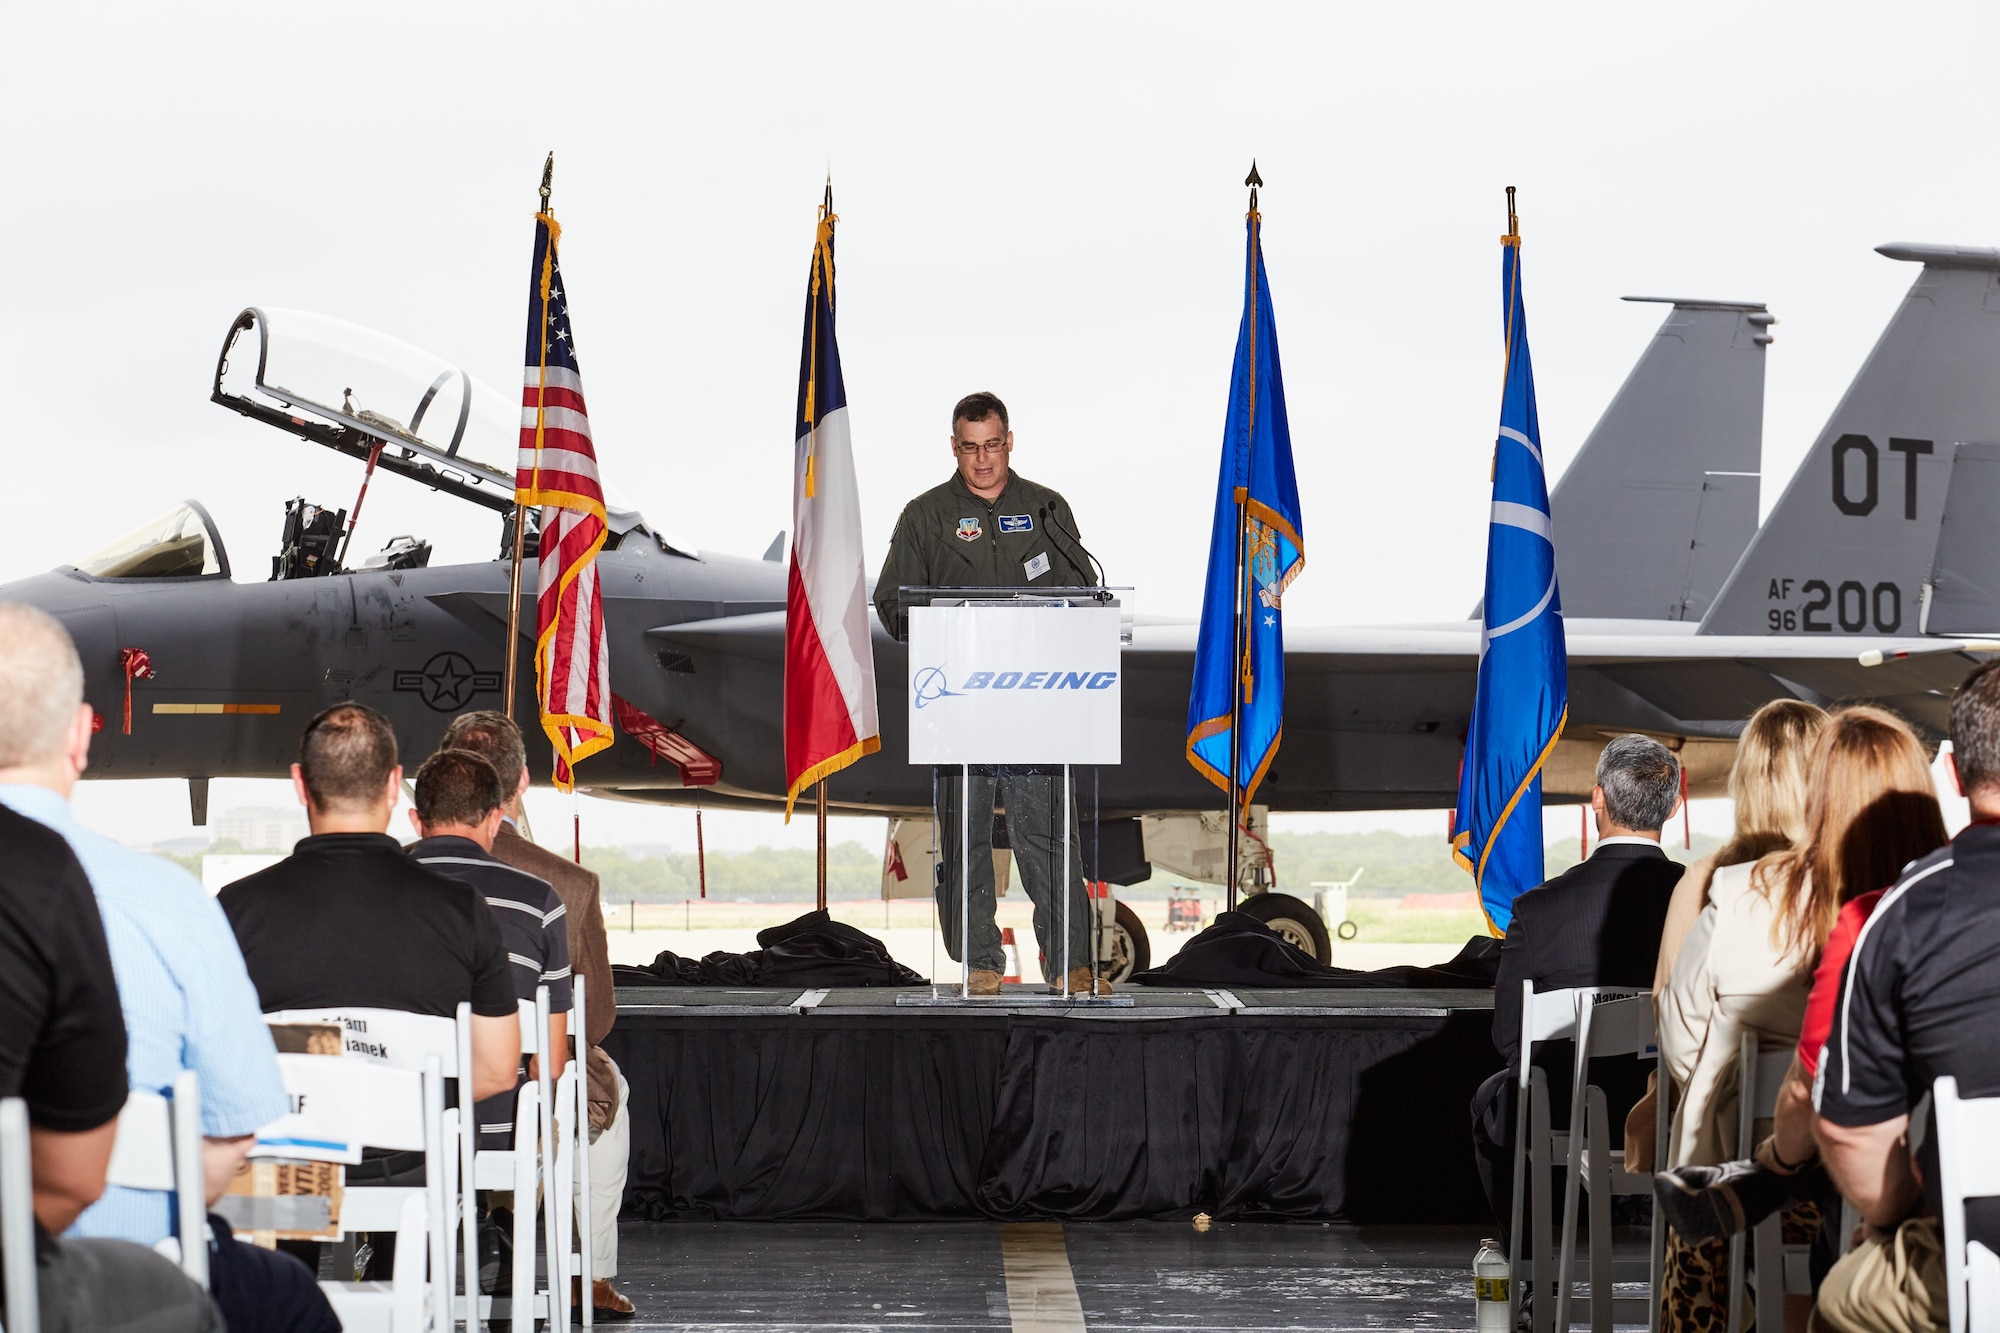 Col. Matthew “Pauly” Schorr addresses the USAF, Boeing, and BAE Systems team on July 21, 2022 at the Boeing San Antonio Modification Facility adjacent to Joint Base San Antonio. (Courtesy photo)